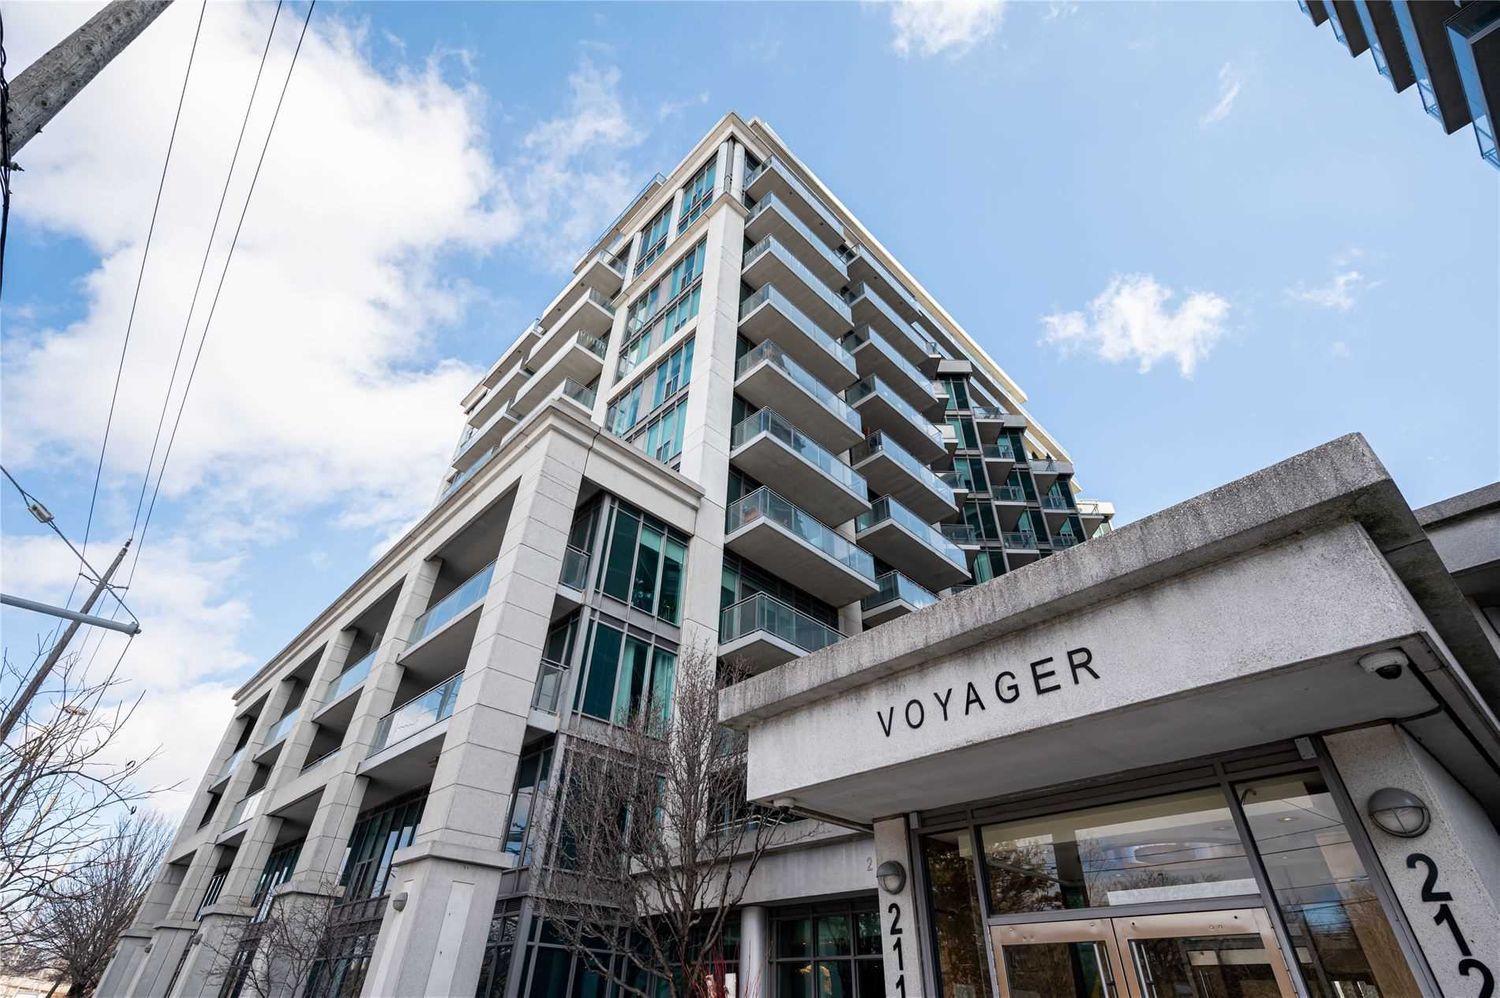 2119 Lake Shore Boulevard W. Voyager II at Waterview Condos is located in  Etobicoke, Toronto - image #2 of 2